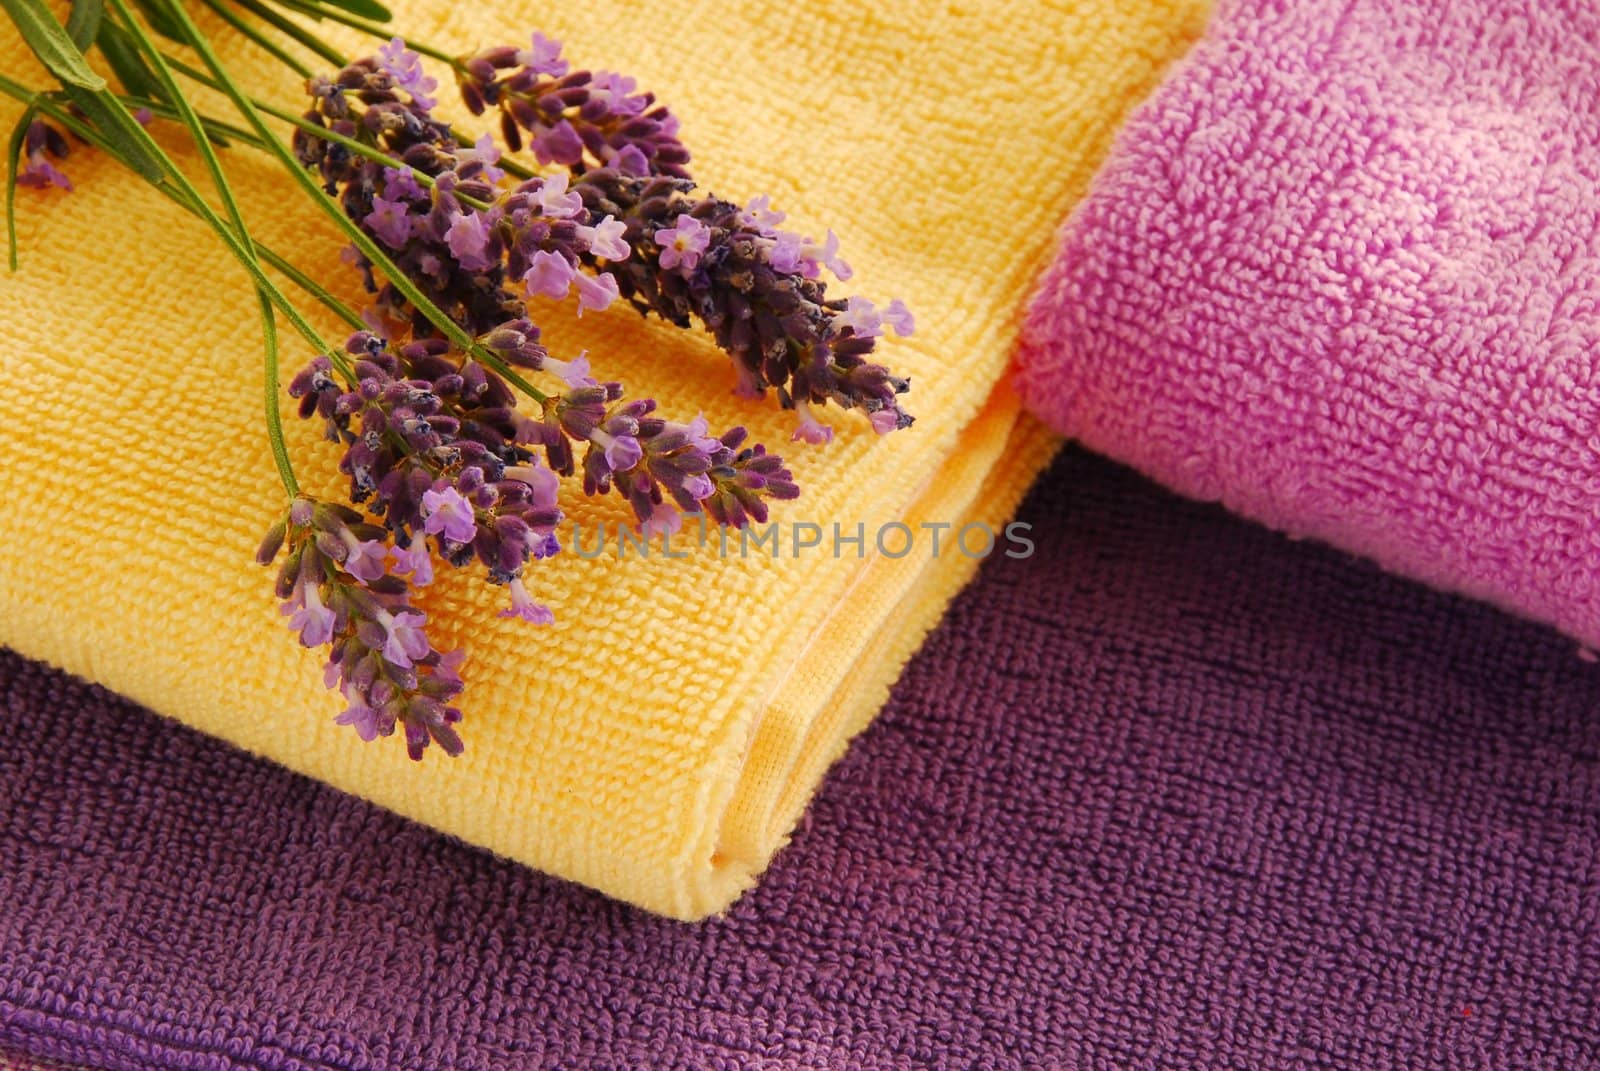 magenta, purple and yellow towels with lavender flowers